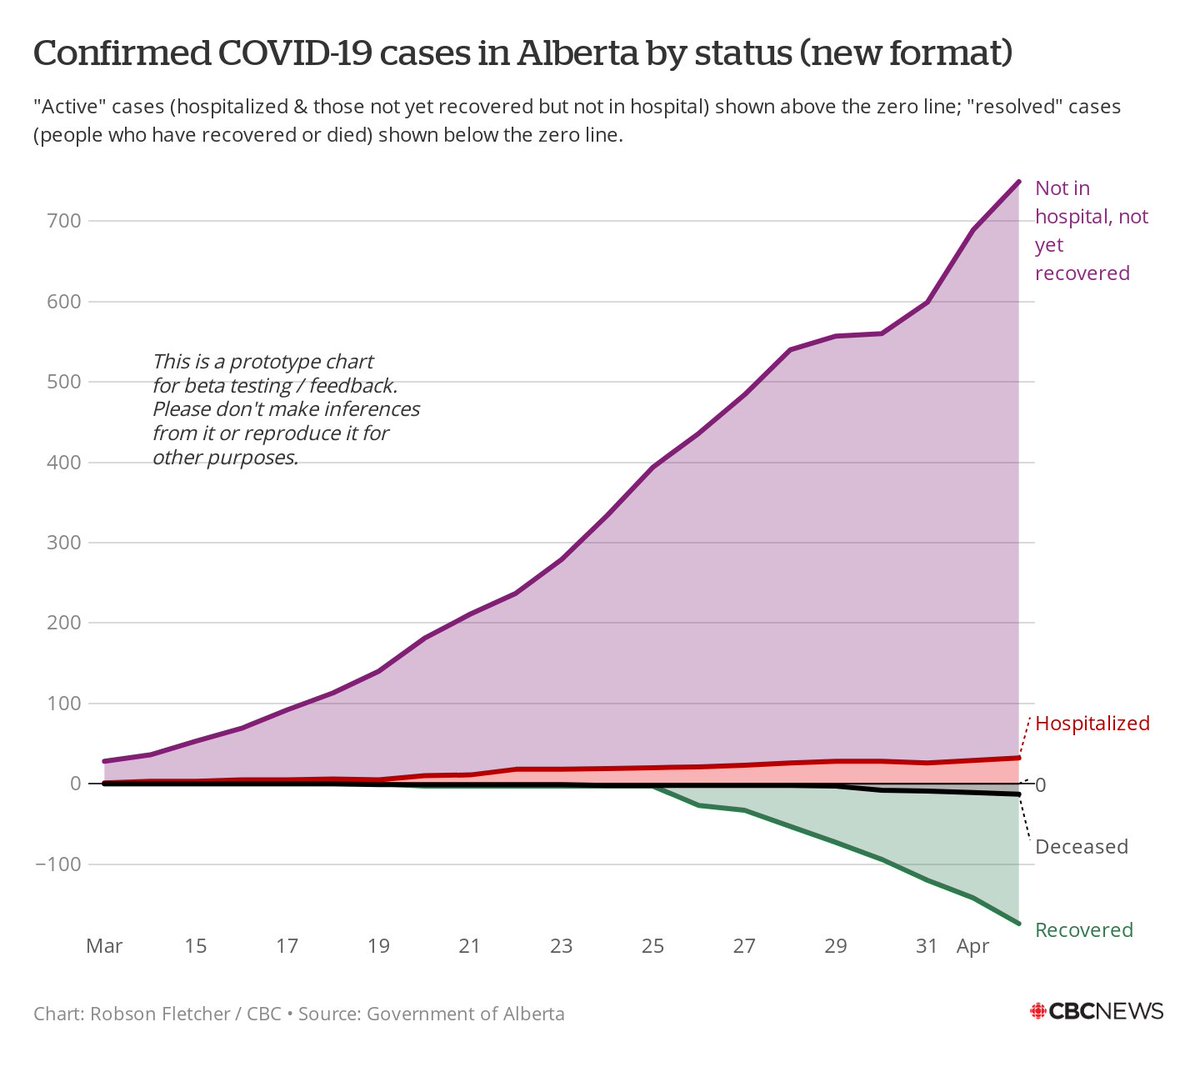 OK let's try this as a vote.Which do you prefer to visualize COVID-19 case status?1. Stacked area chart: All values "above" zero2. Line chart: Active cases "above" zero, resolved cases "below"I'll put a poll in the next tweet in this thread.Comments also welcome!